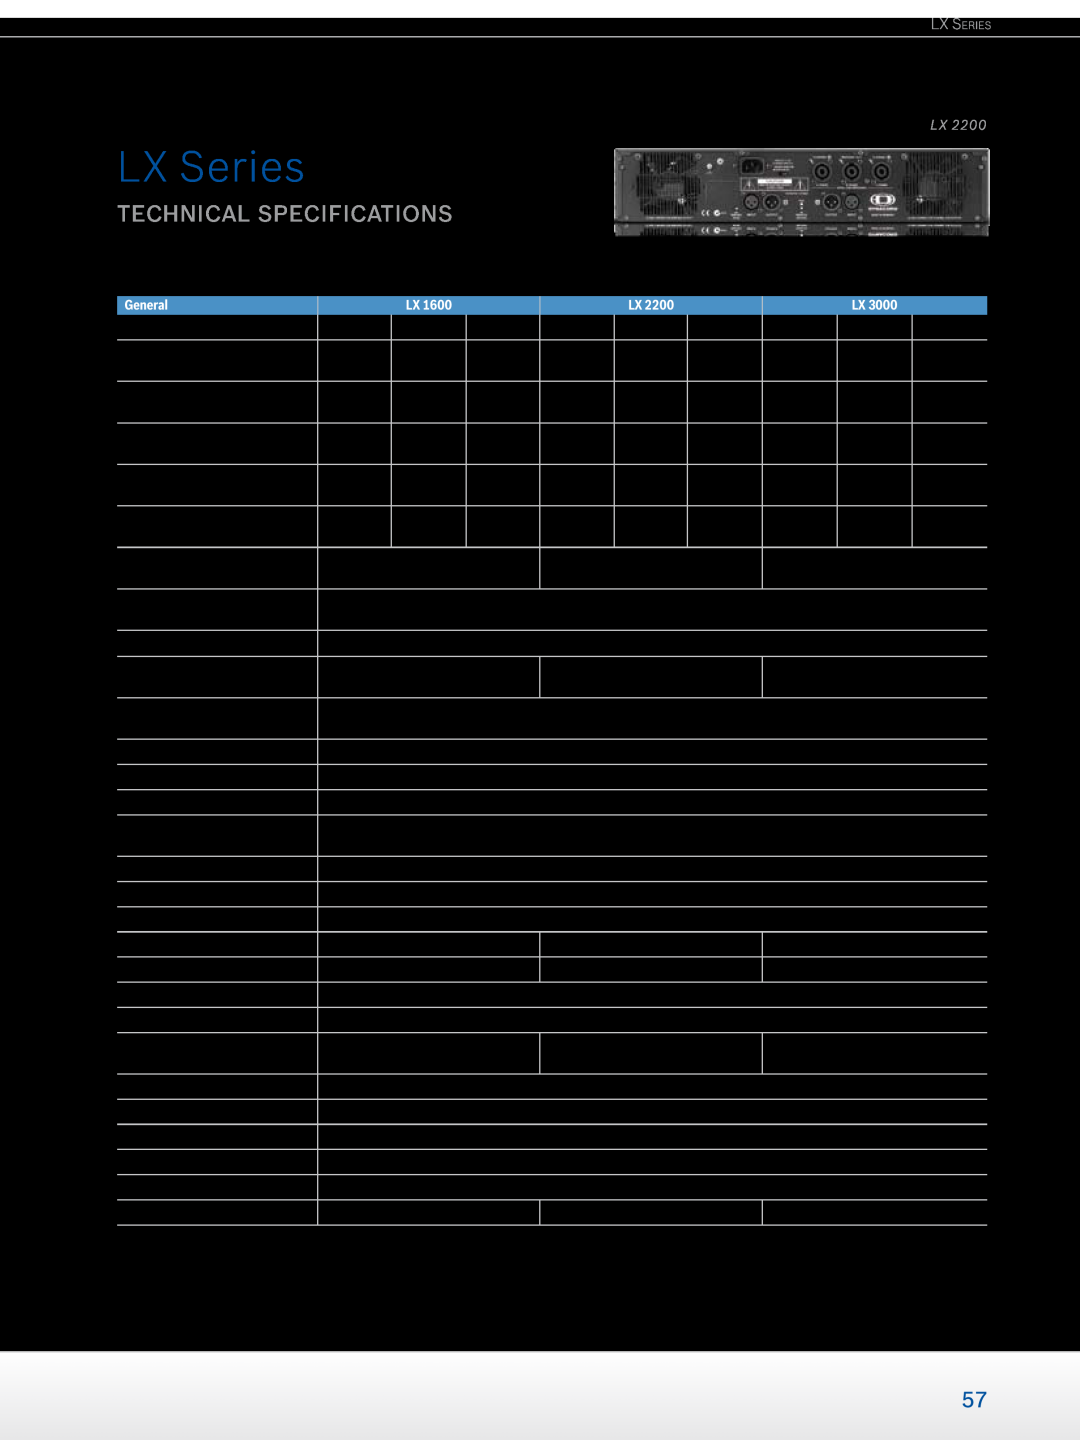 Dynacord Professional Power Amplifiers manual LX Series, technical specifications, General 